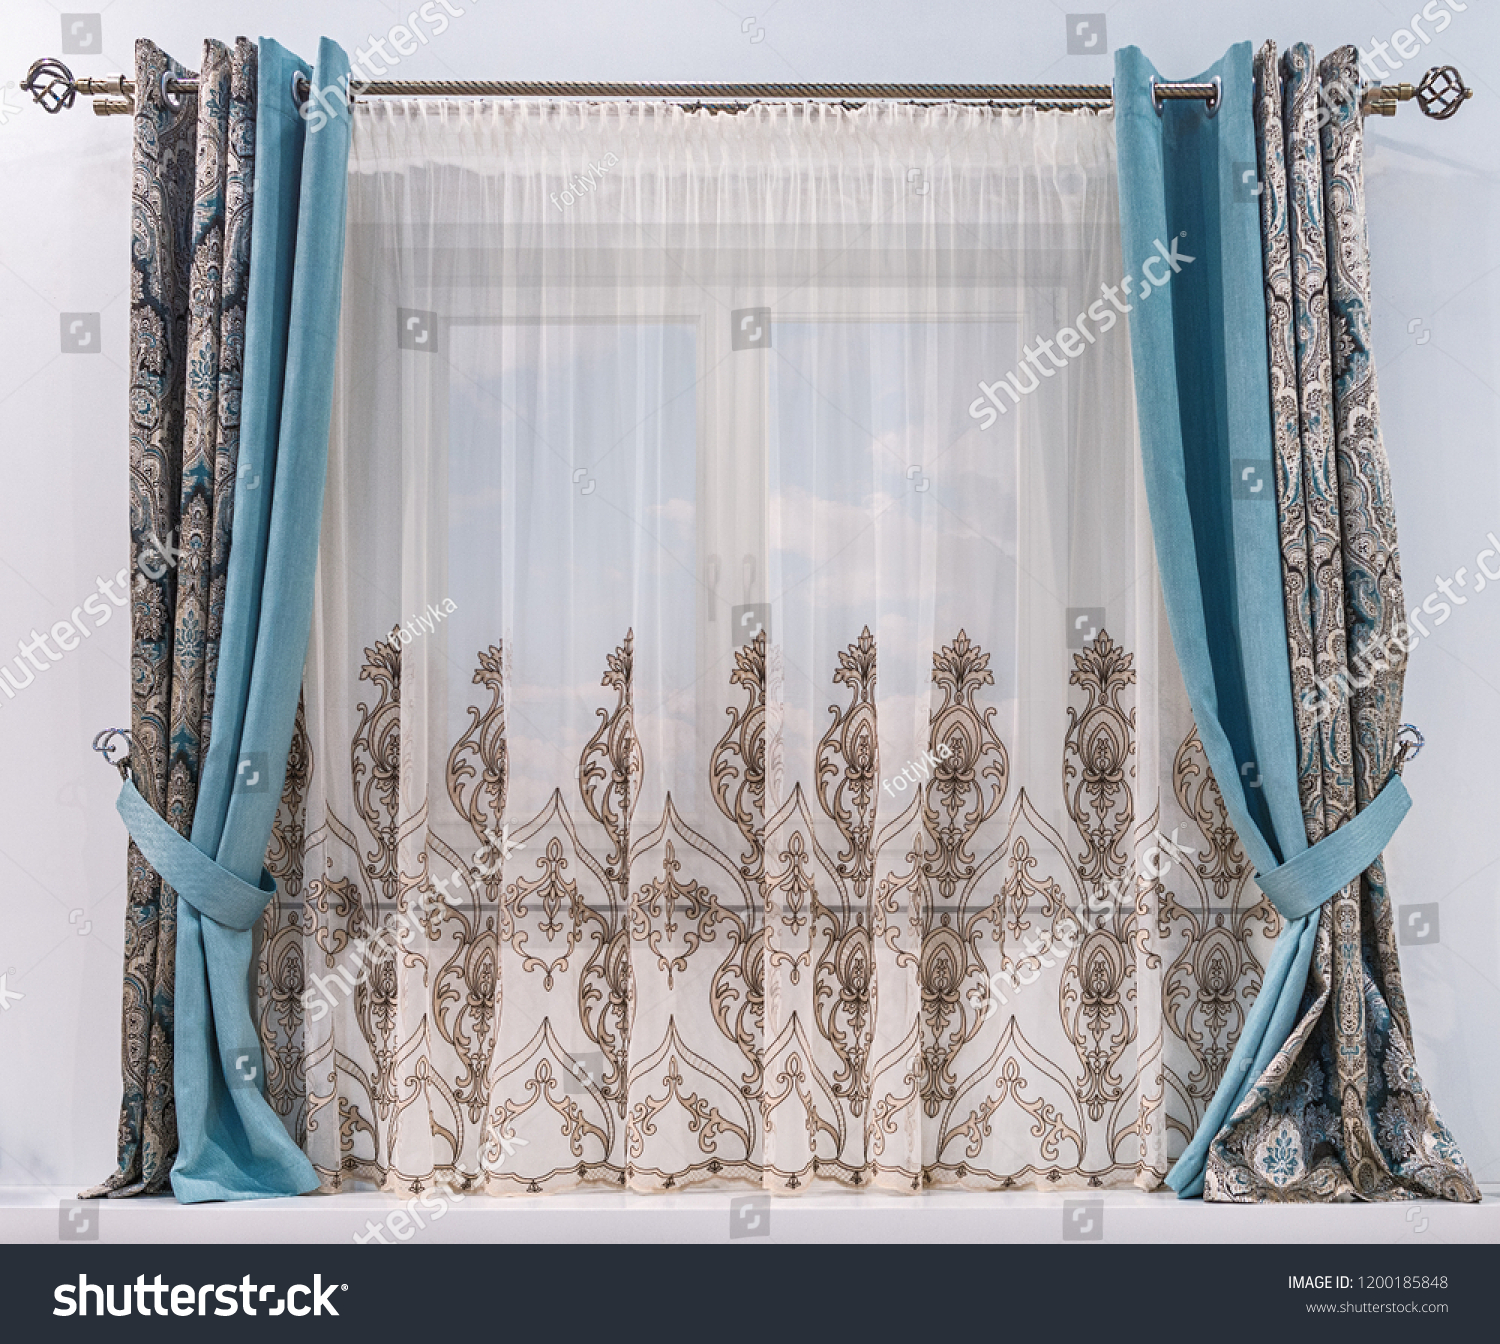 Modern design of a small window. Combined curtain with eyelets, monochromatic turquoise fabric, tapestry with an ornament and a tulle with patterns hang on a round cornice. #1200185848